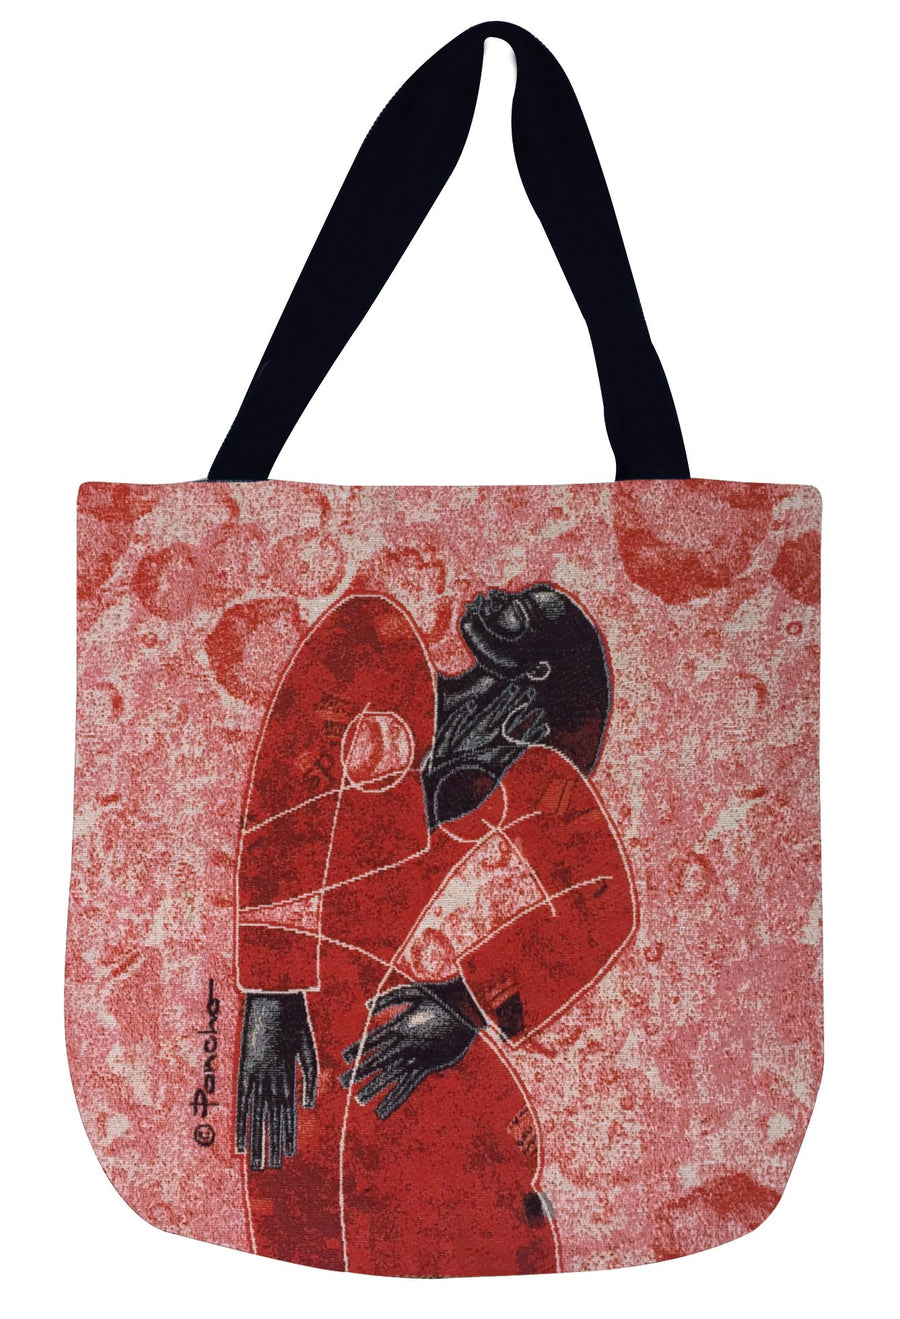 Definitely Diva: African American Woven Tapestry Tote Bag by Larry "Poncho" Brown